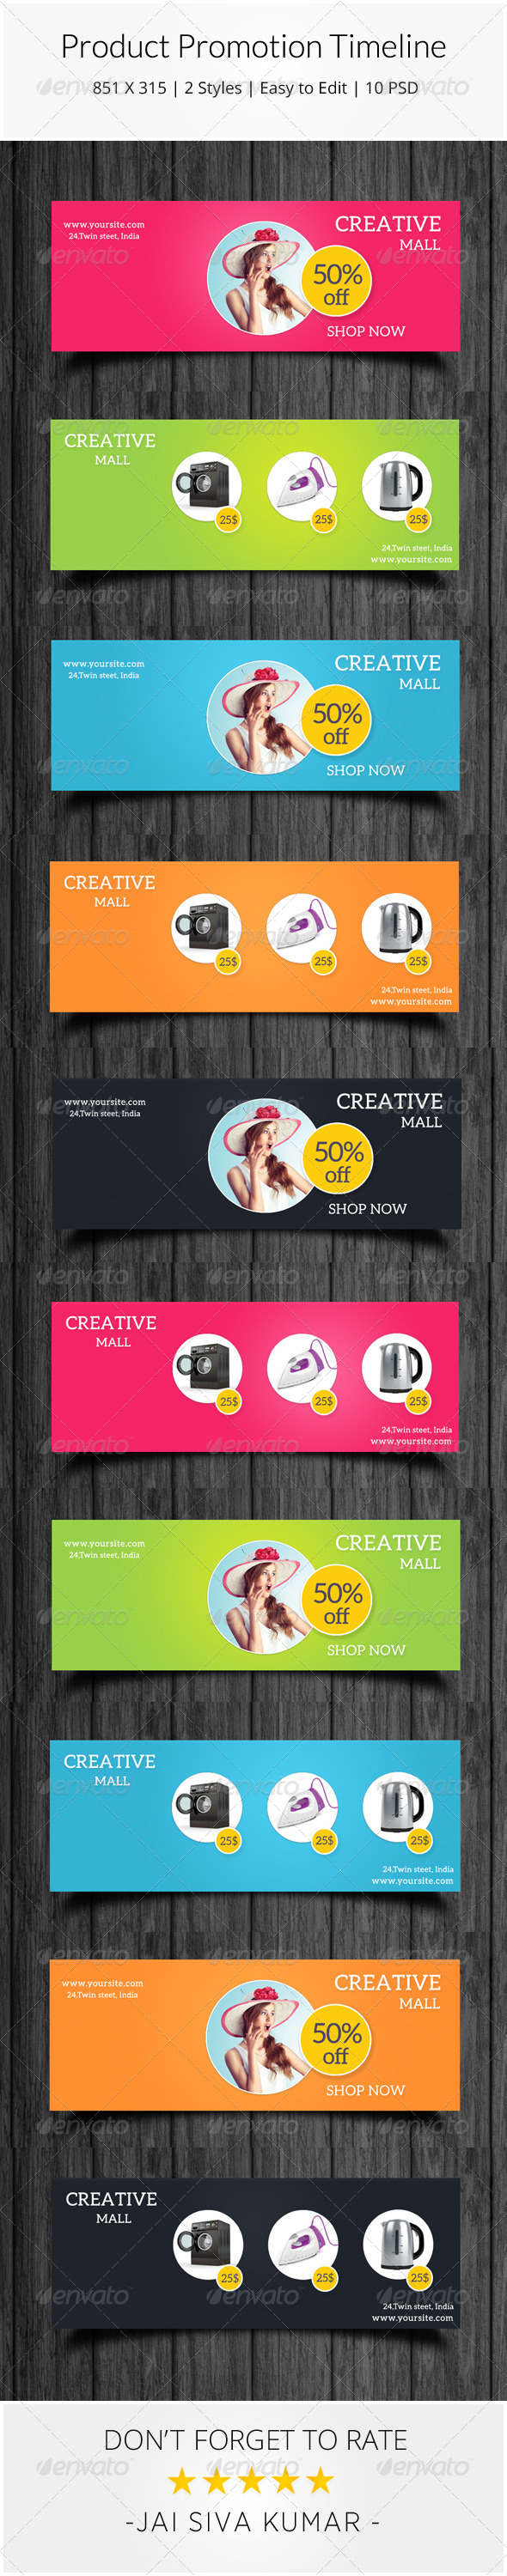 GraphicRiver Product Promotion Timeline 7689684